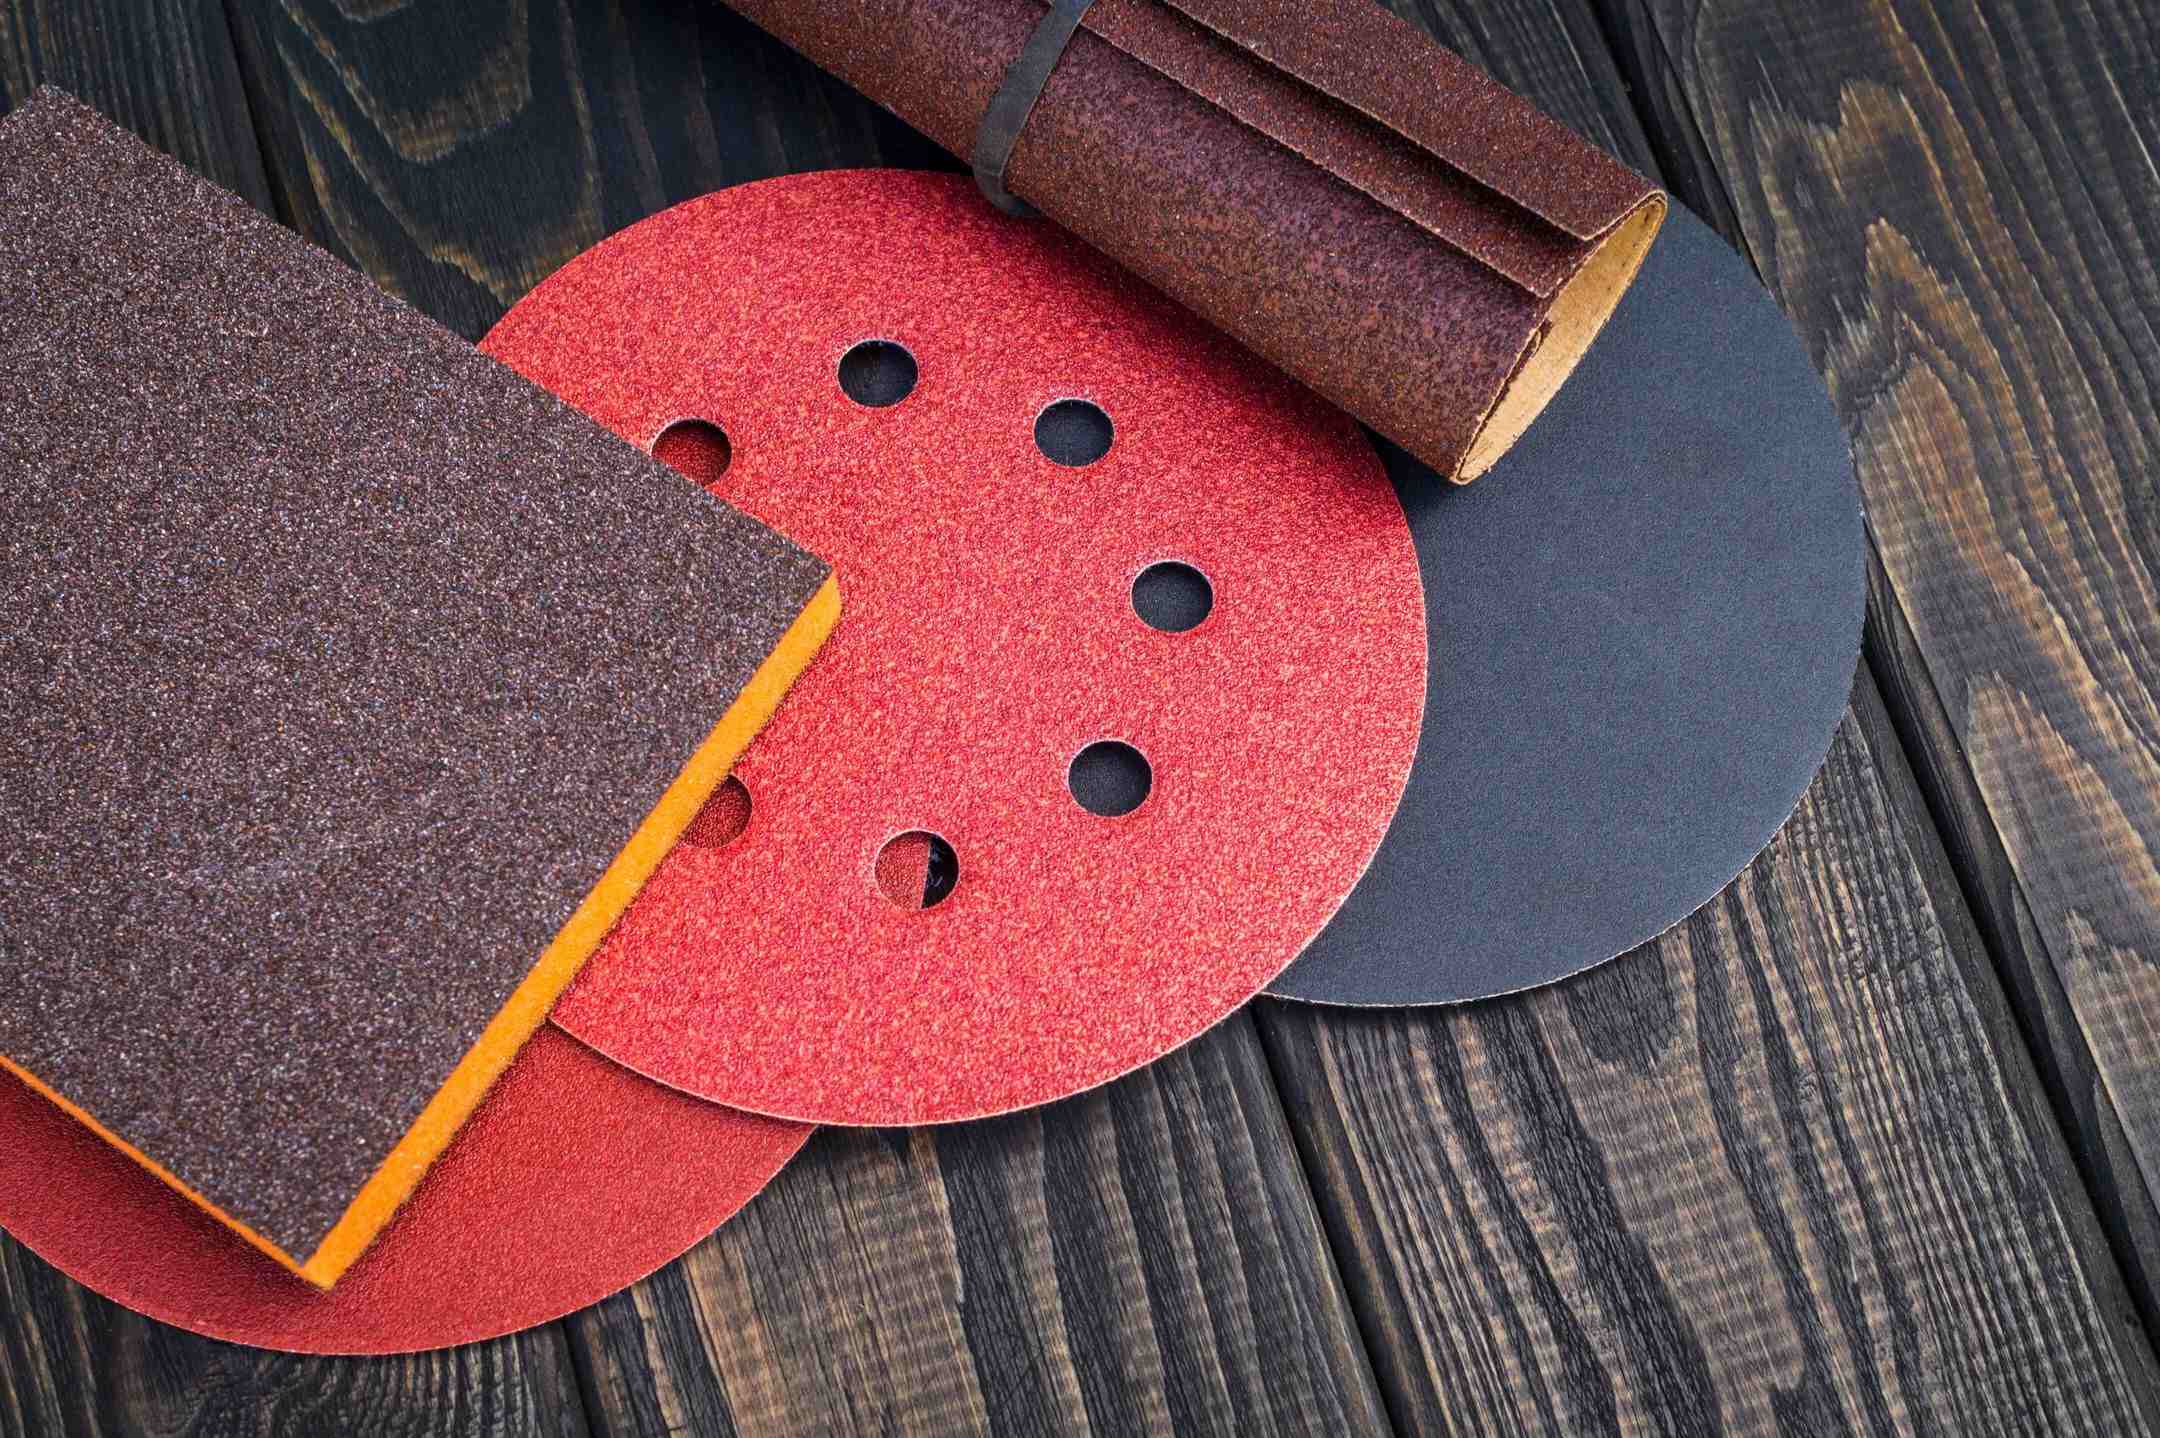 Ultimate Sandpaper Review: A Must-Have for Him